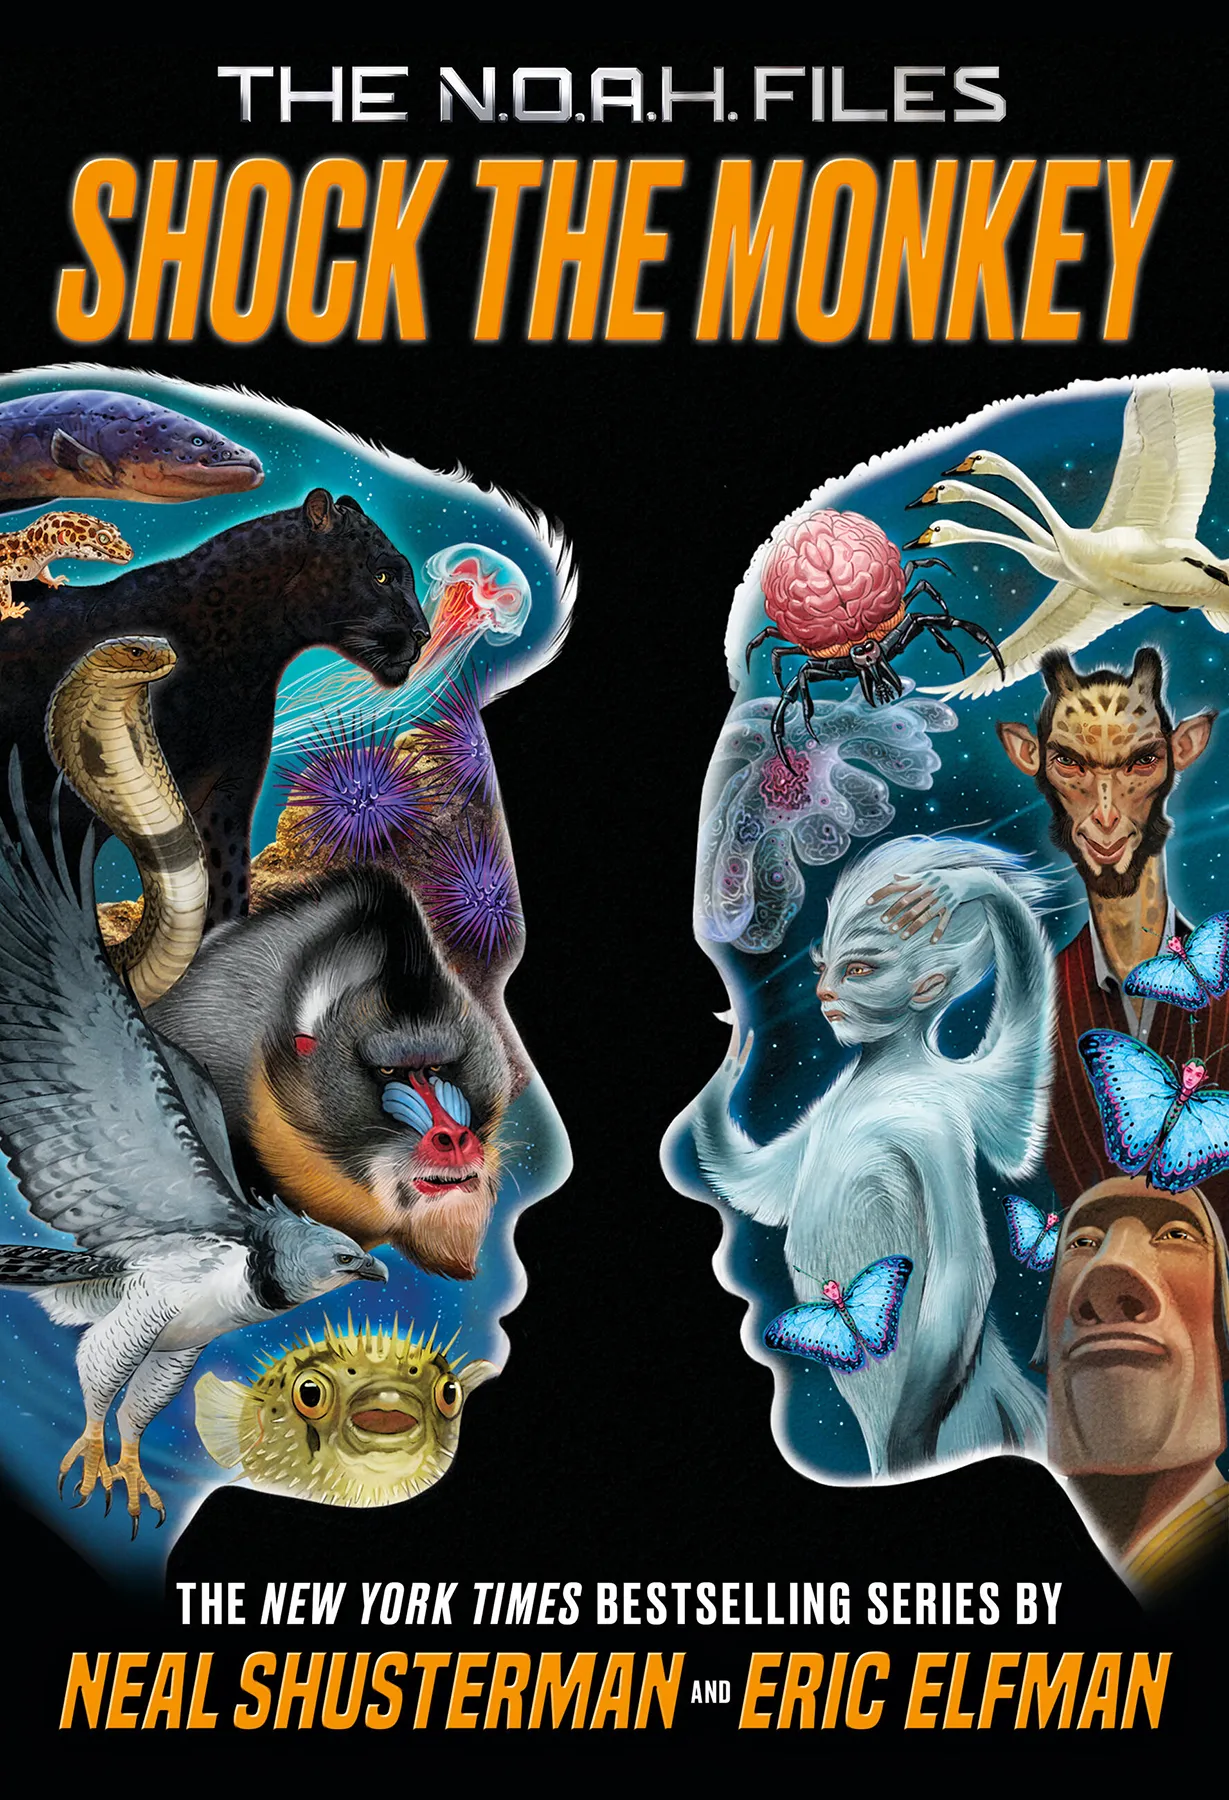 Shock the Monkey (The N.O.A.H. Files #2)